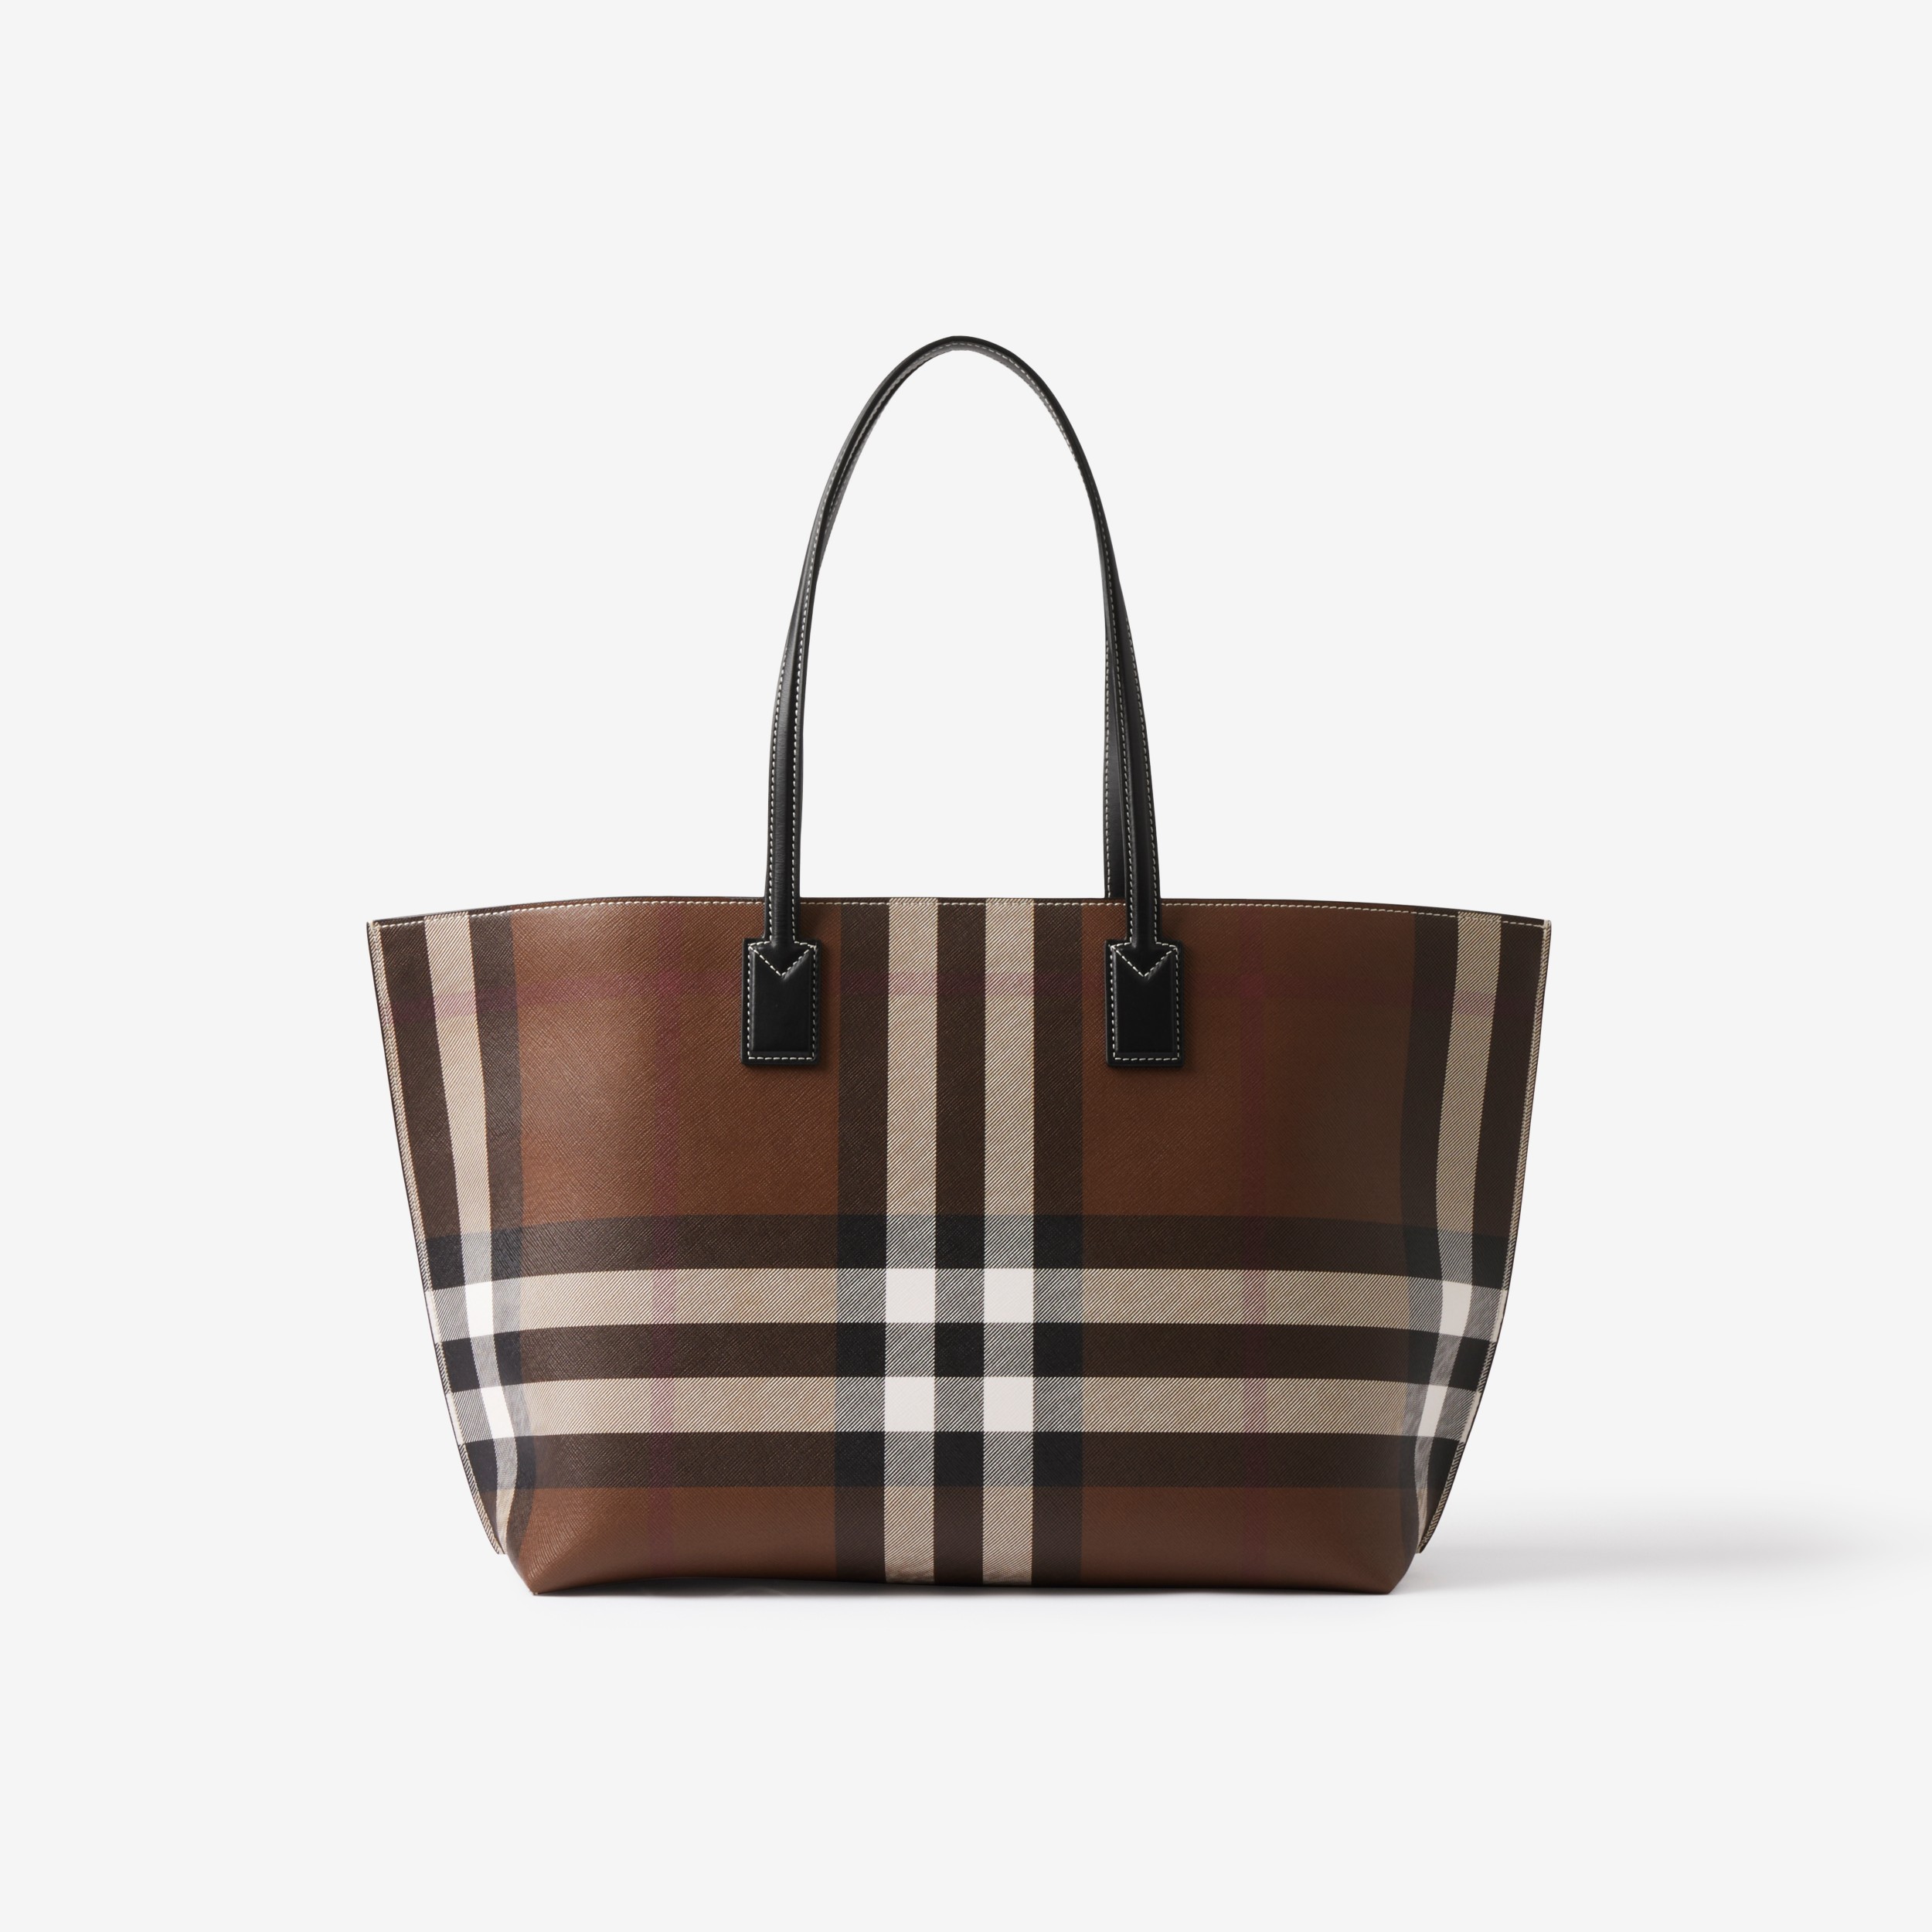 Arriba 37+ imagen burberry check and leather tote